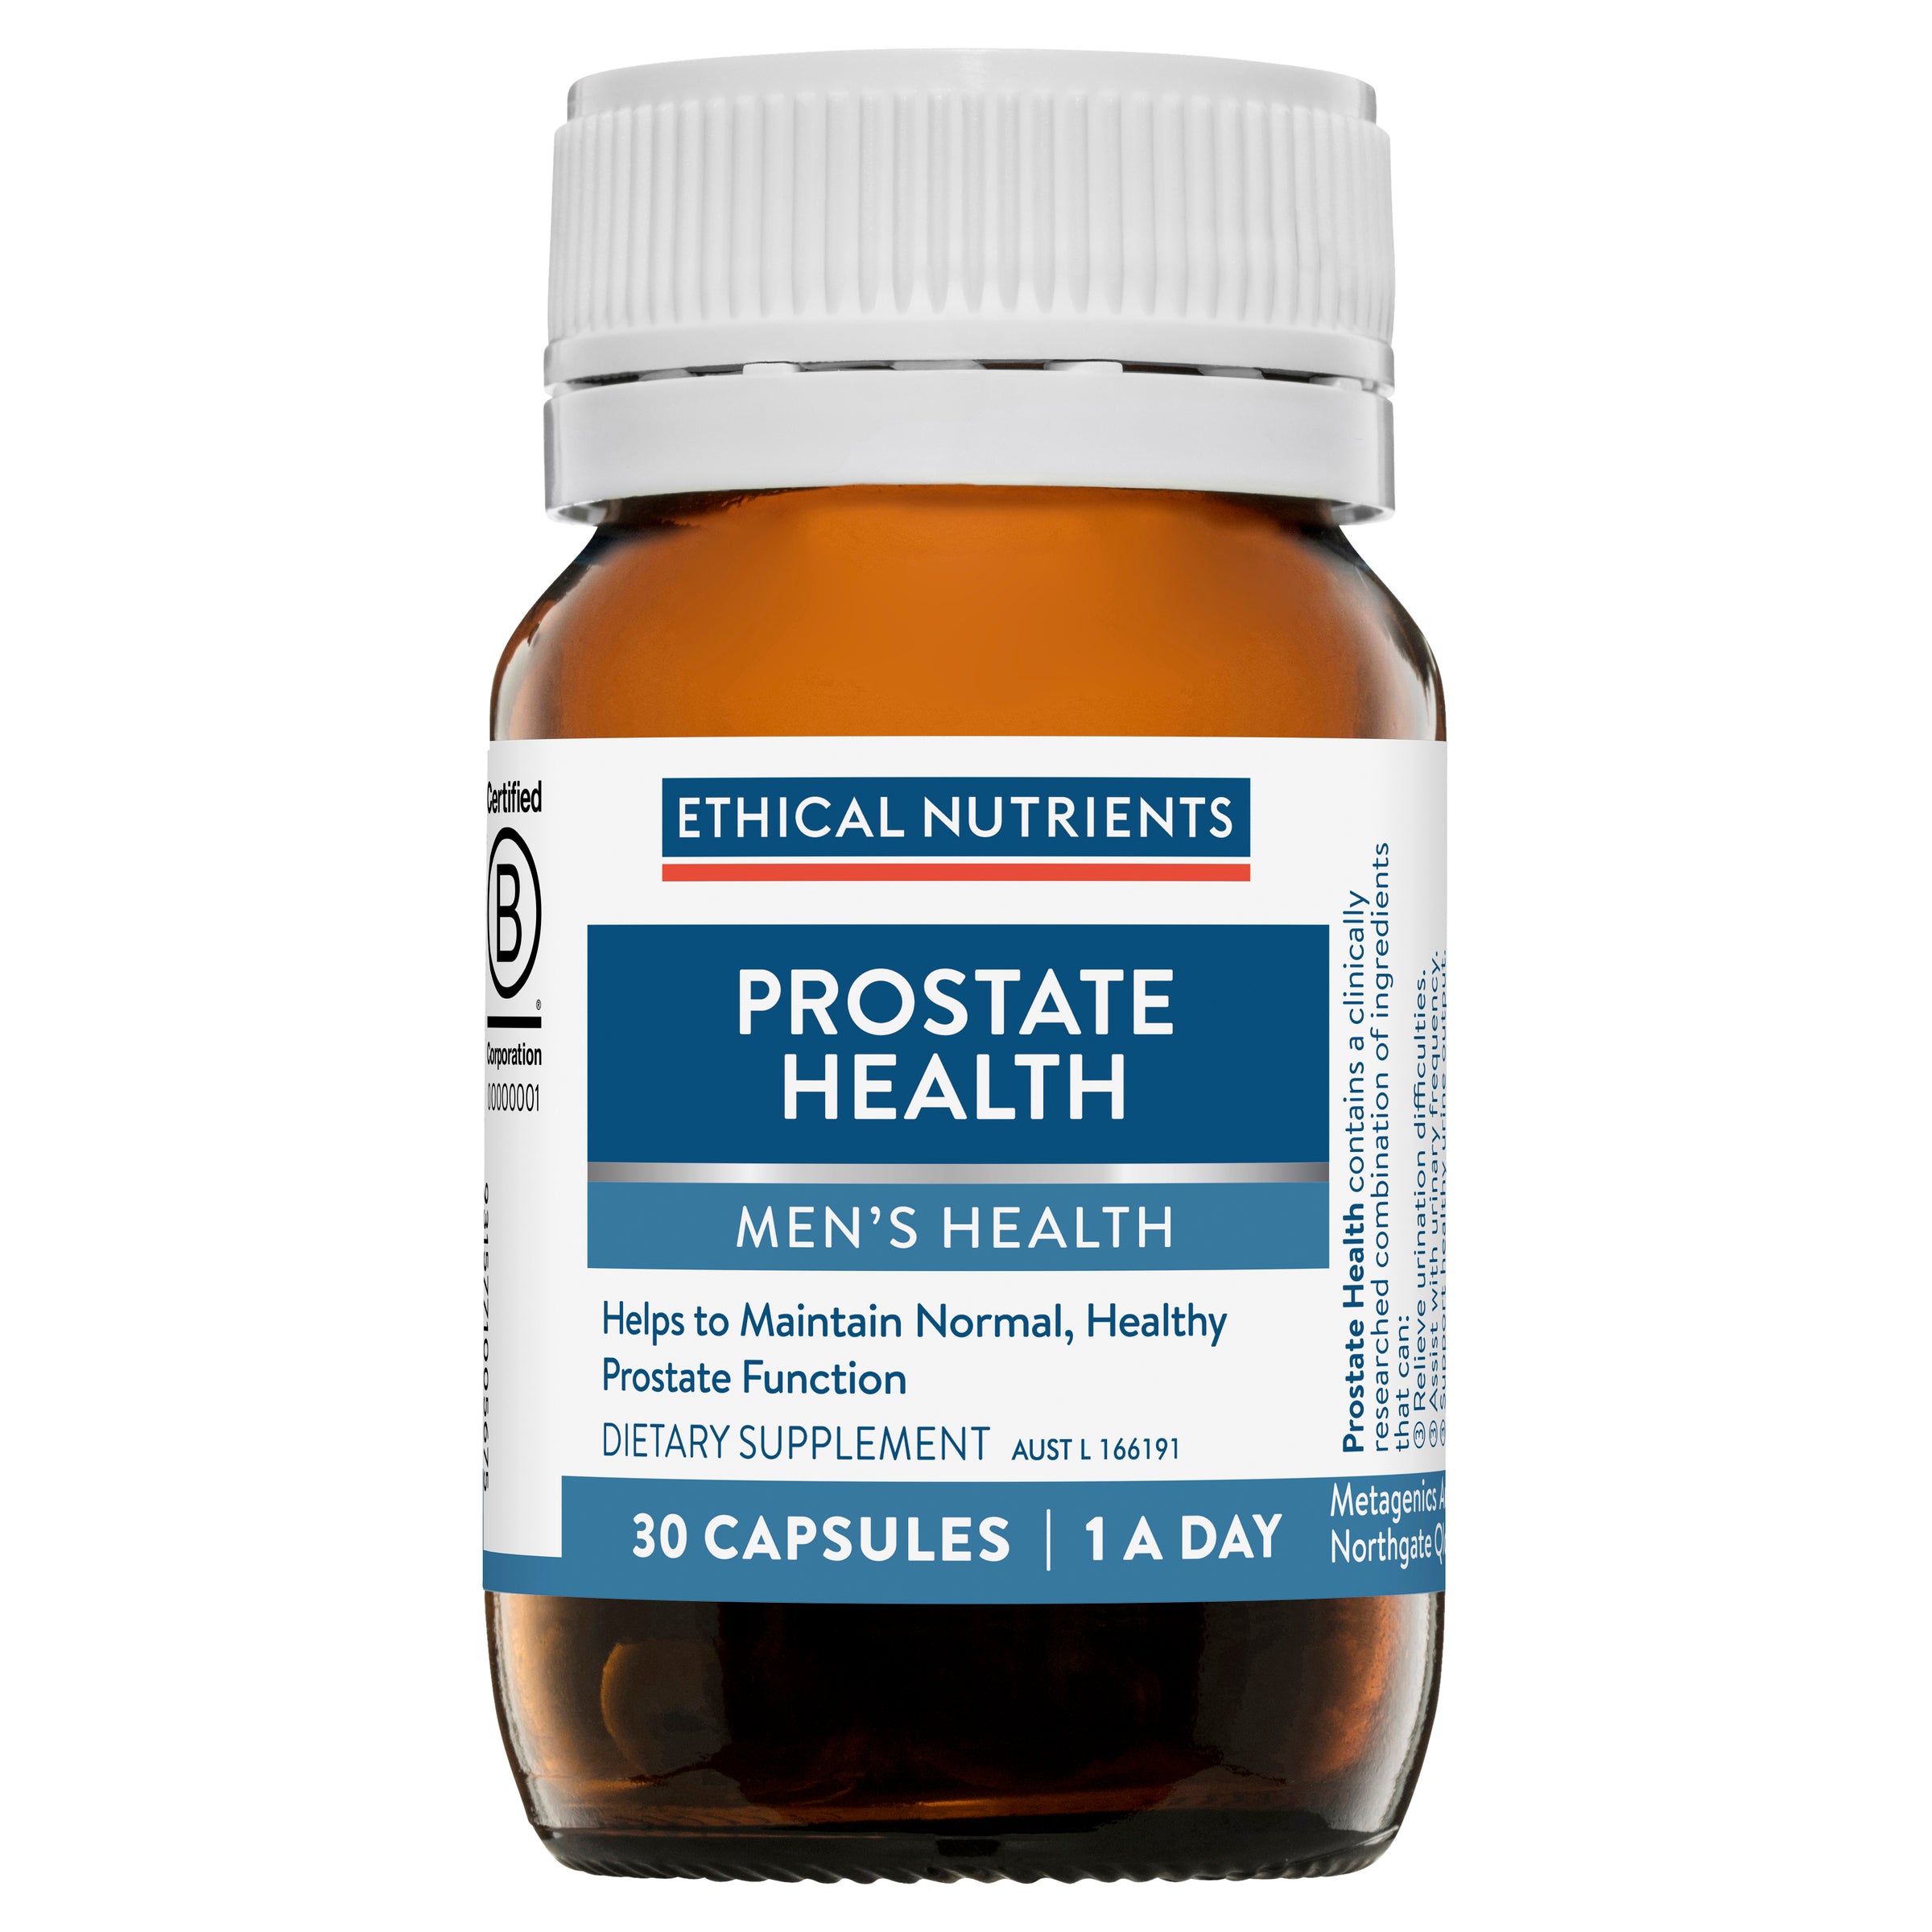 Ethical Nutrients Prostate Health 30 Capsules #size_30 capsules